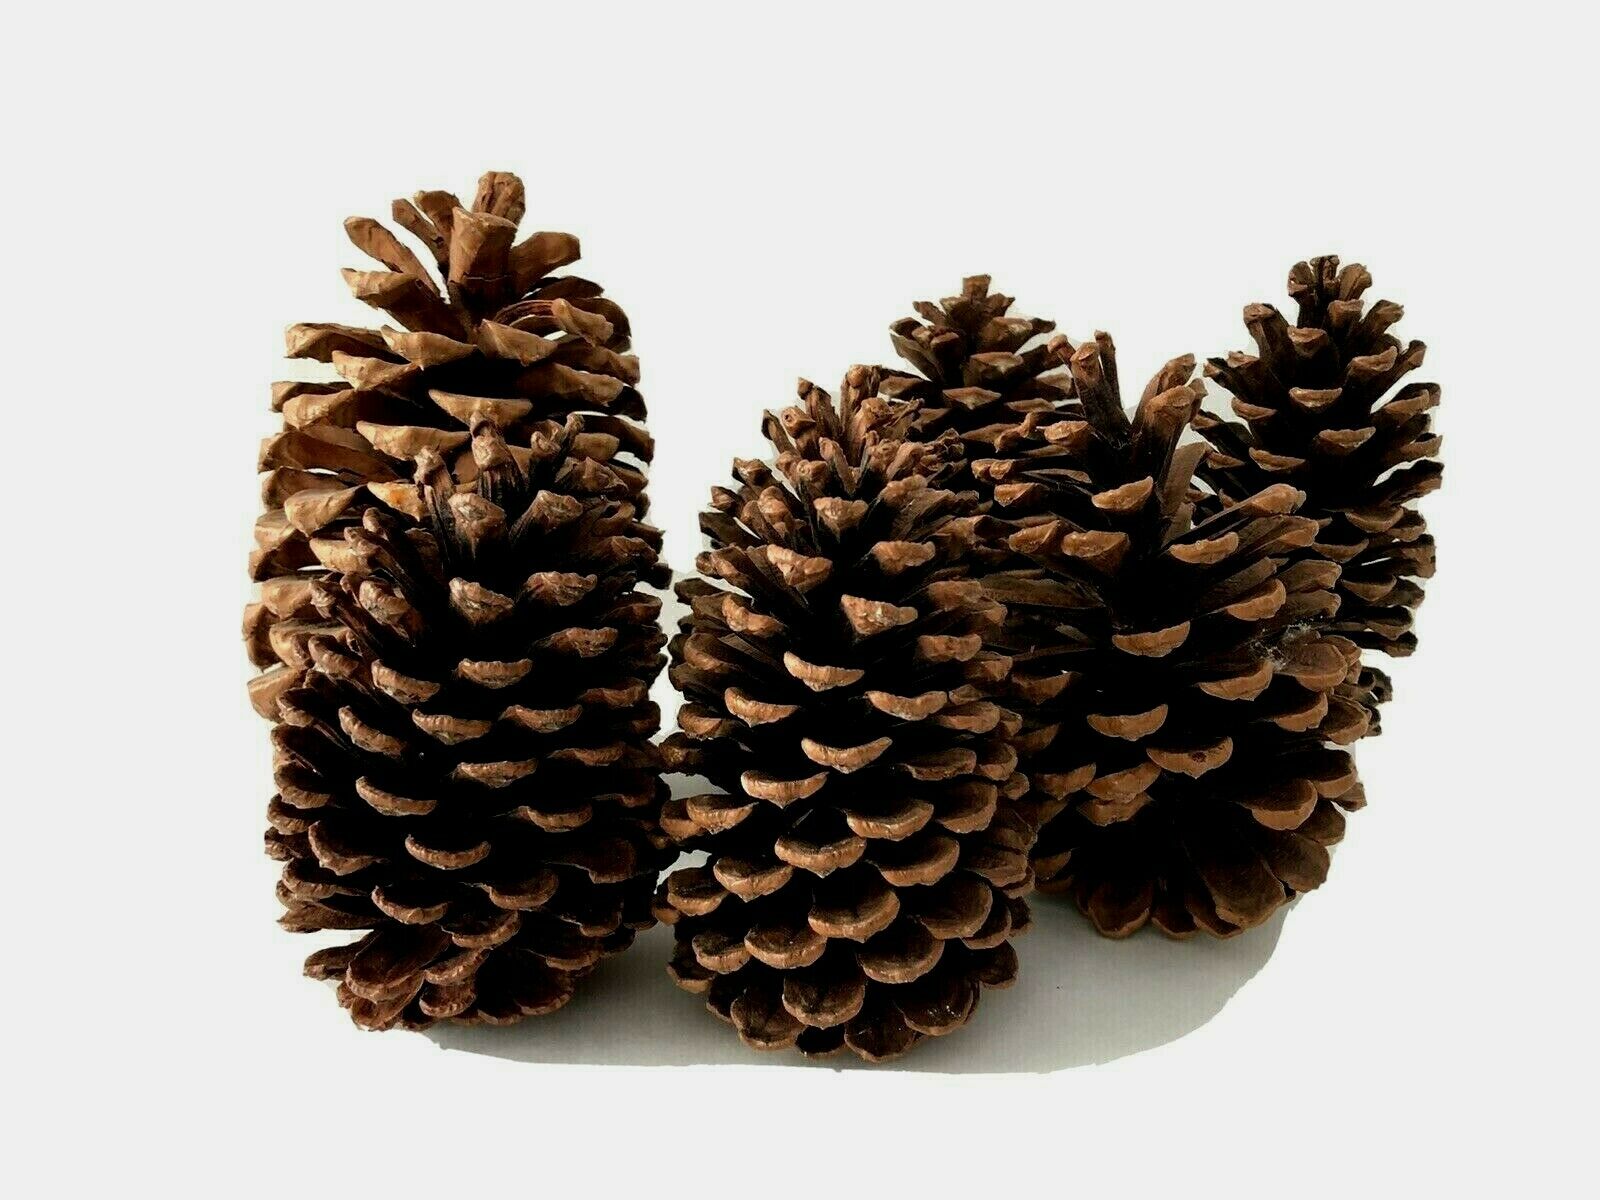 7 Big Pine Cones For Crafts - Different Sizes - 5 To 6-1/2 Inch Tall